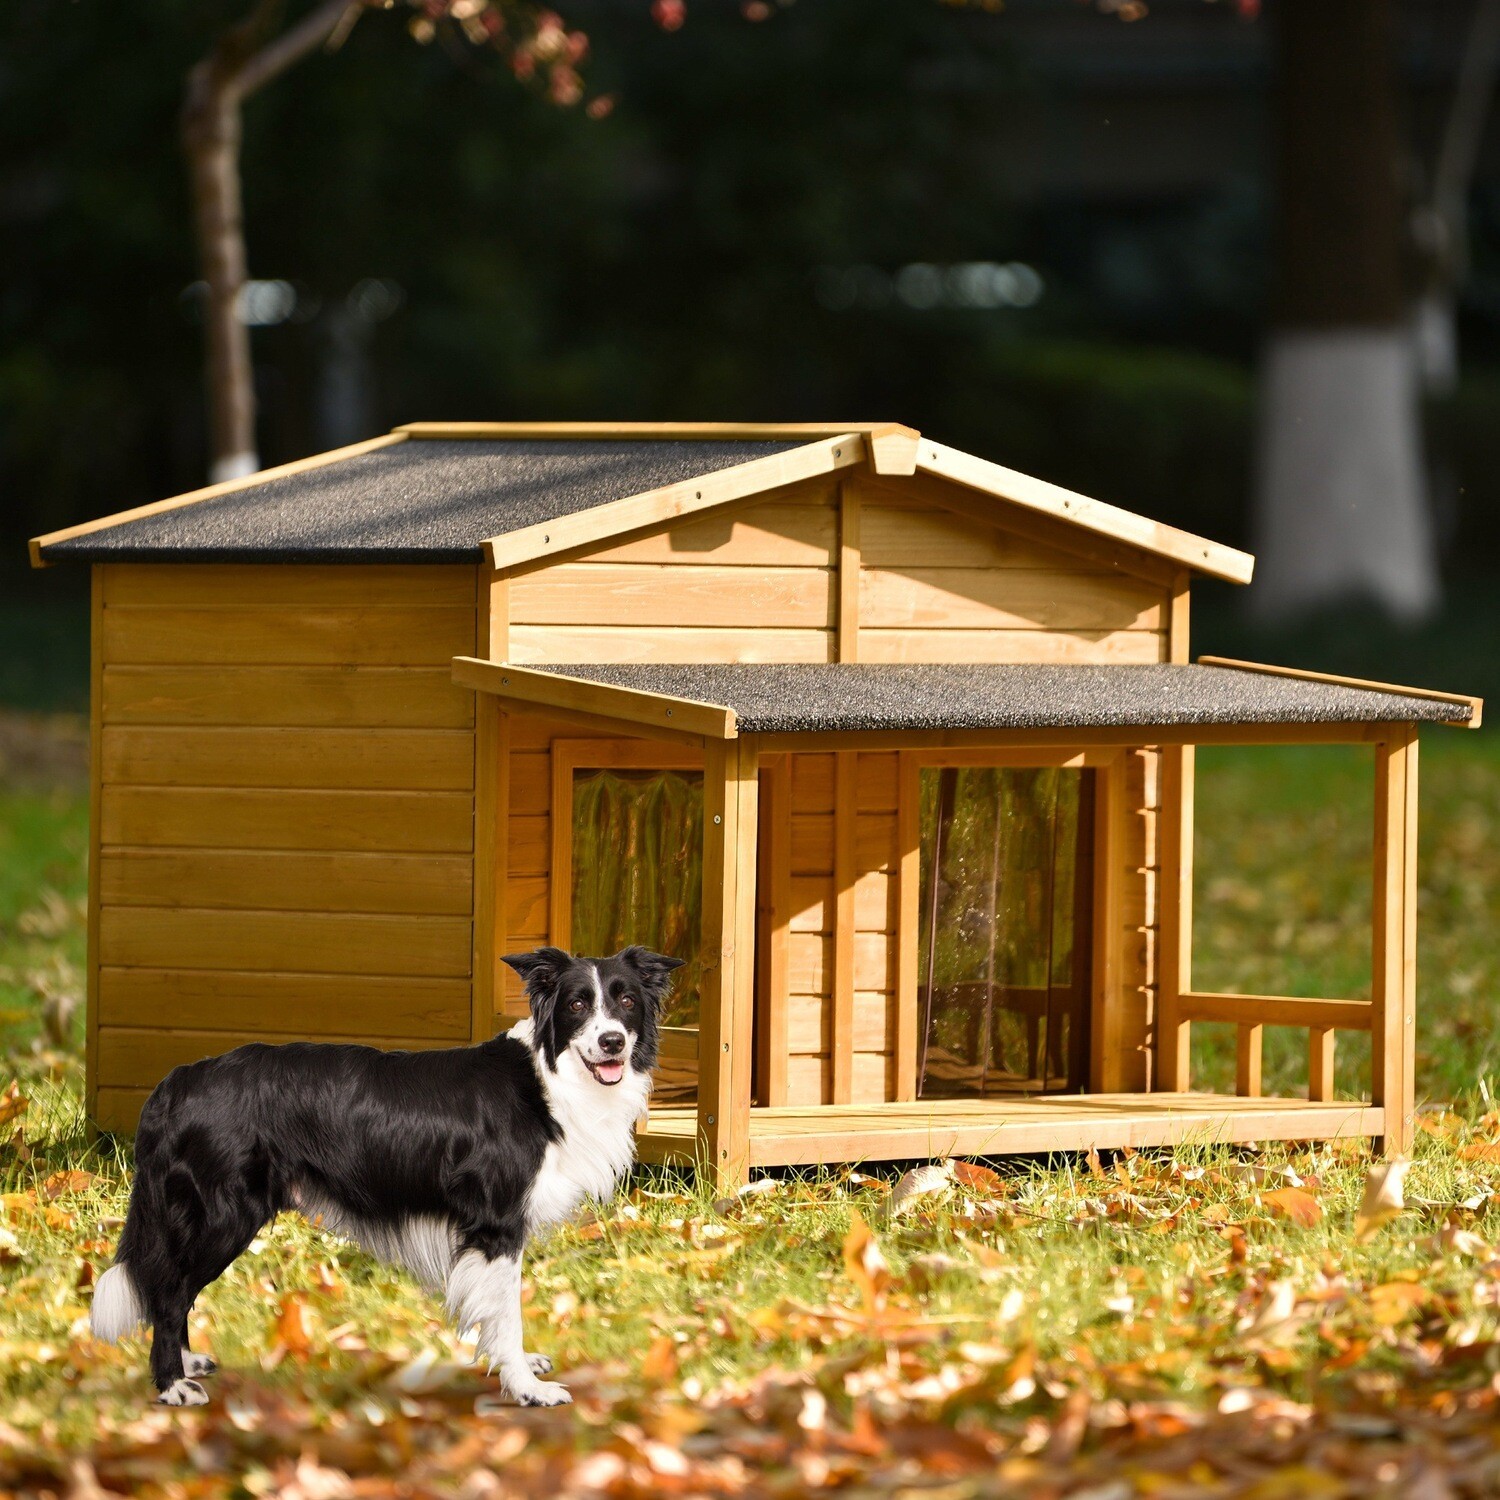 Large Wooden Dog House with Porch: Outdoor Comfort and Style for Your Pup